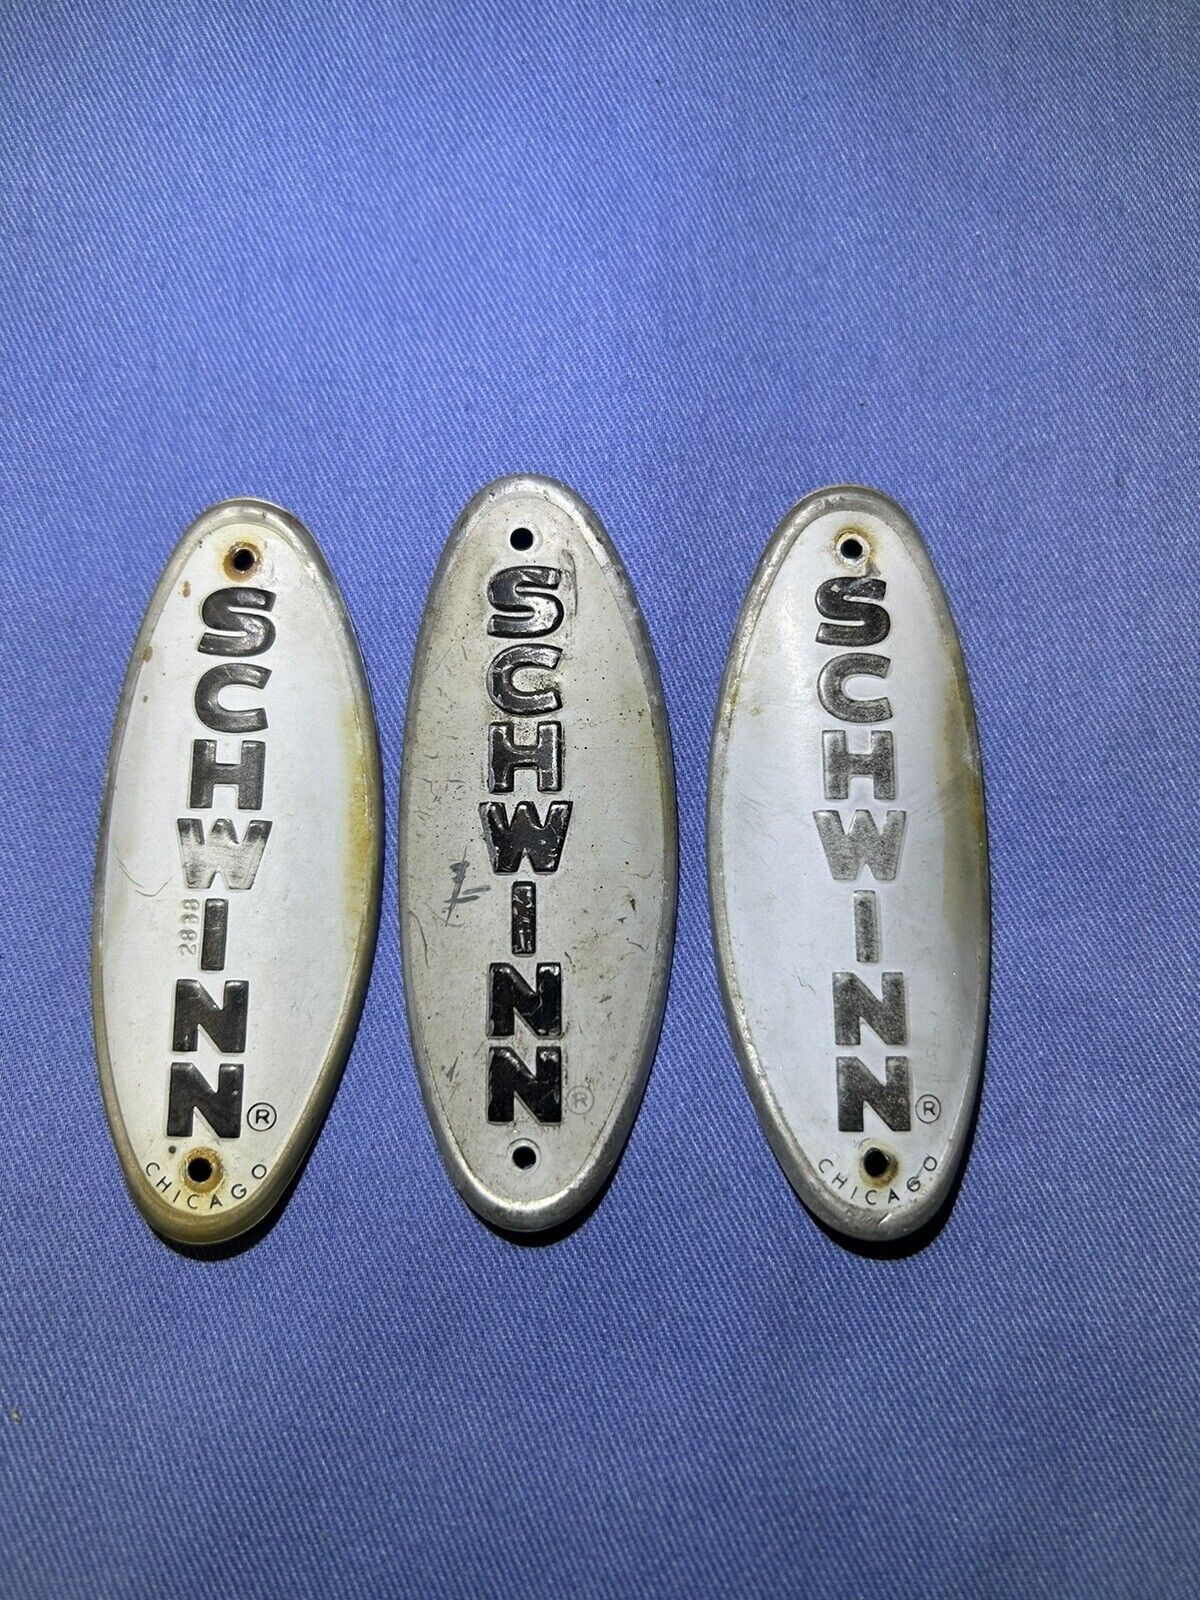 Vintage Schwinn Chicago Bicycle Head Badges White w Black Letters LOT OF 3